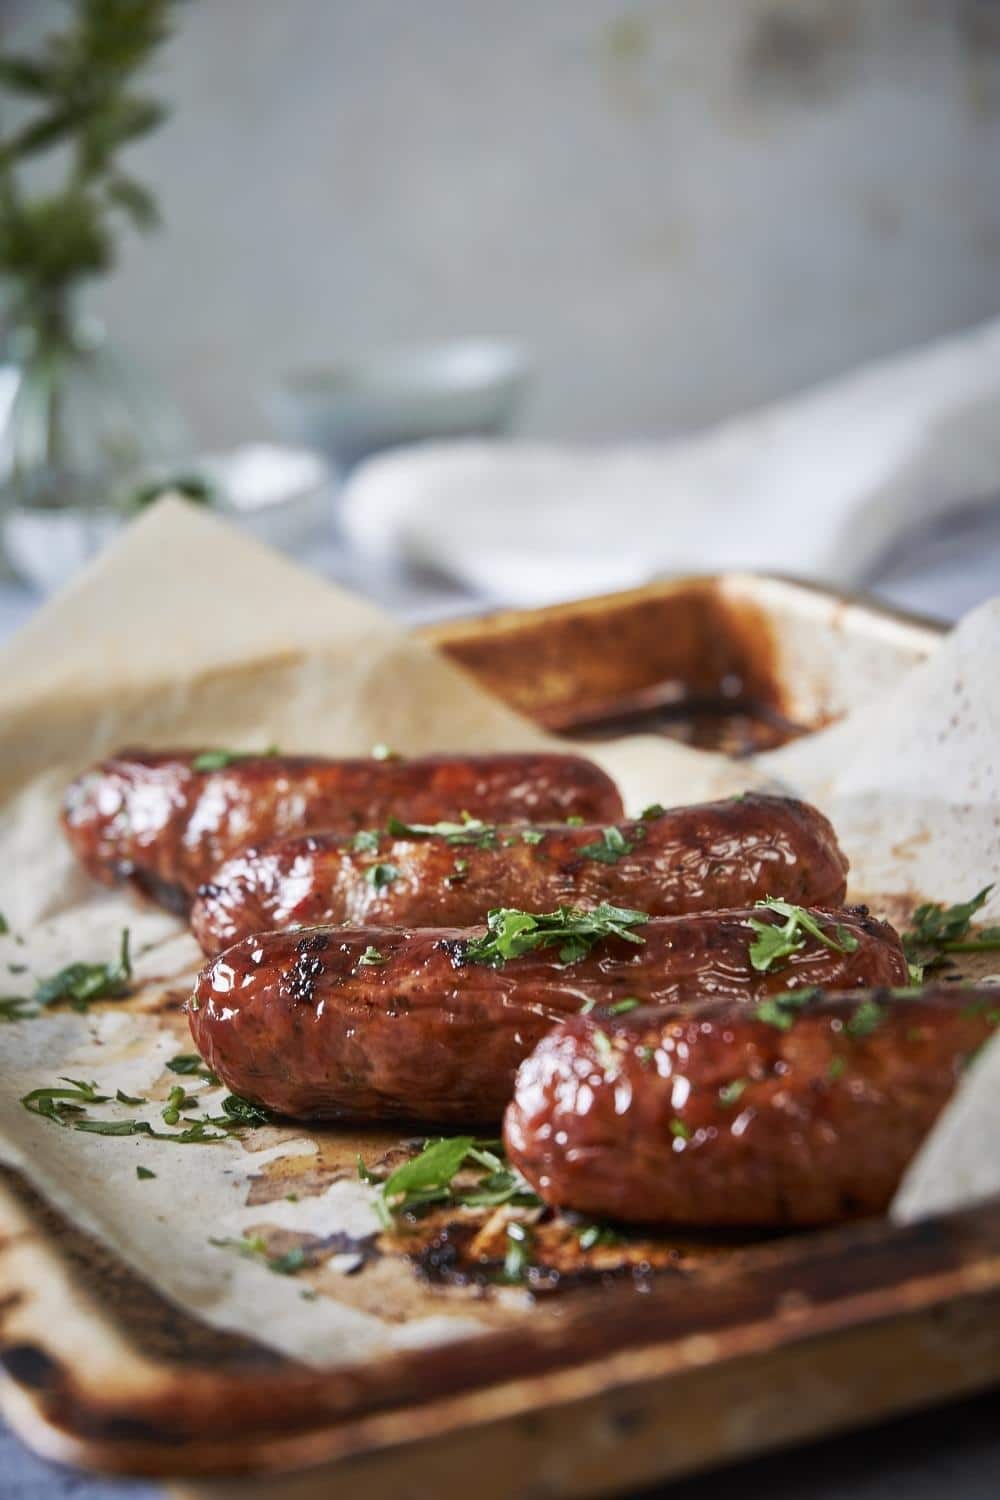 Four roasted brats garnished with parsley in a sheet pan lined with parchment paper.